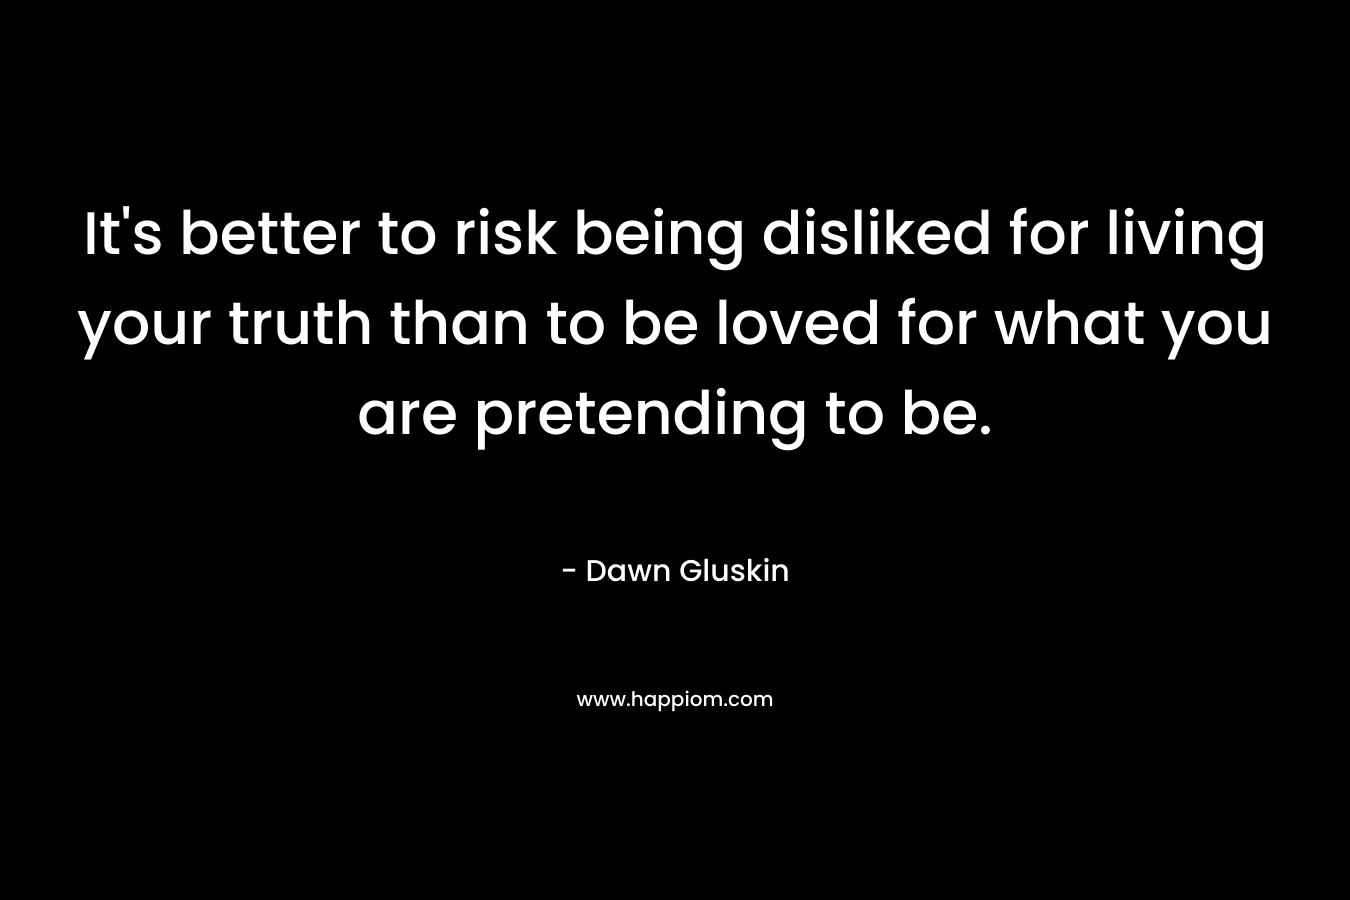 It’s better to risk being disliked for living your truth than to be loved for what you are pretending to be. – Dawn Gluskin